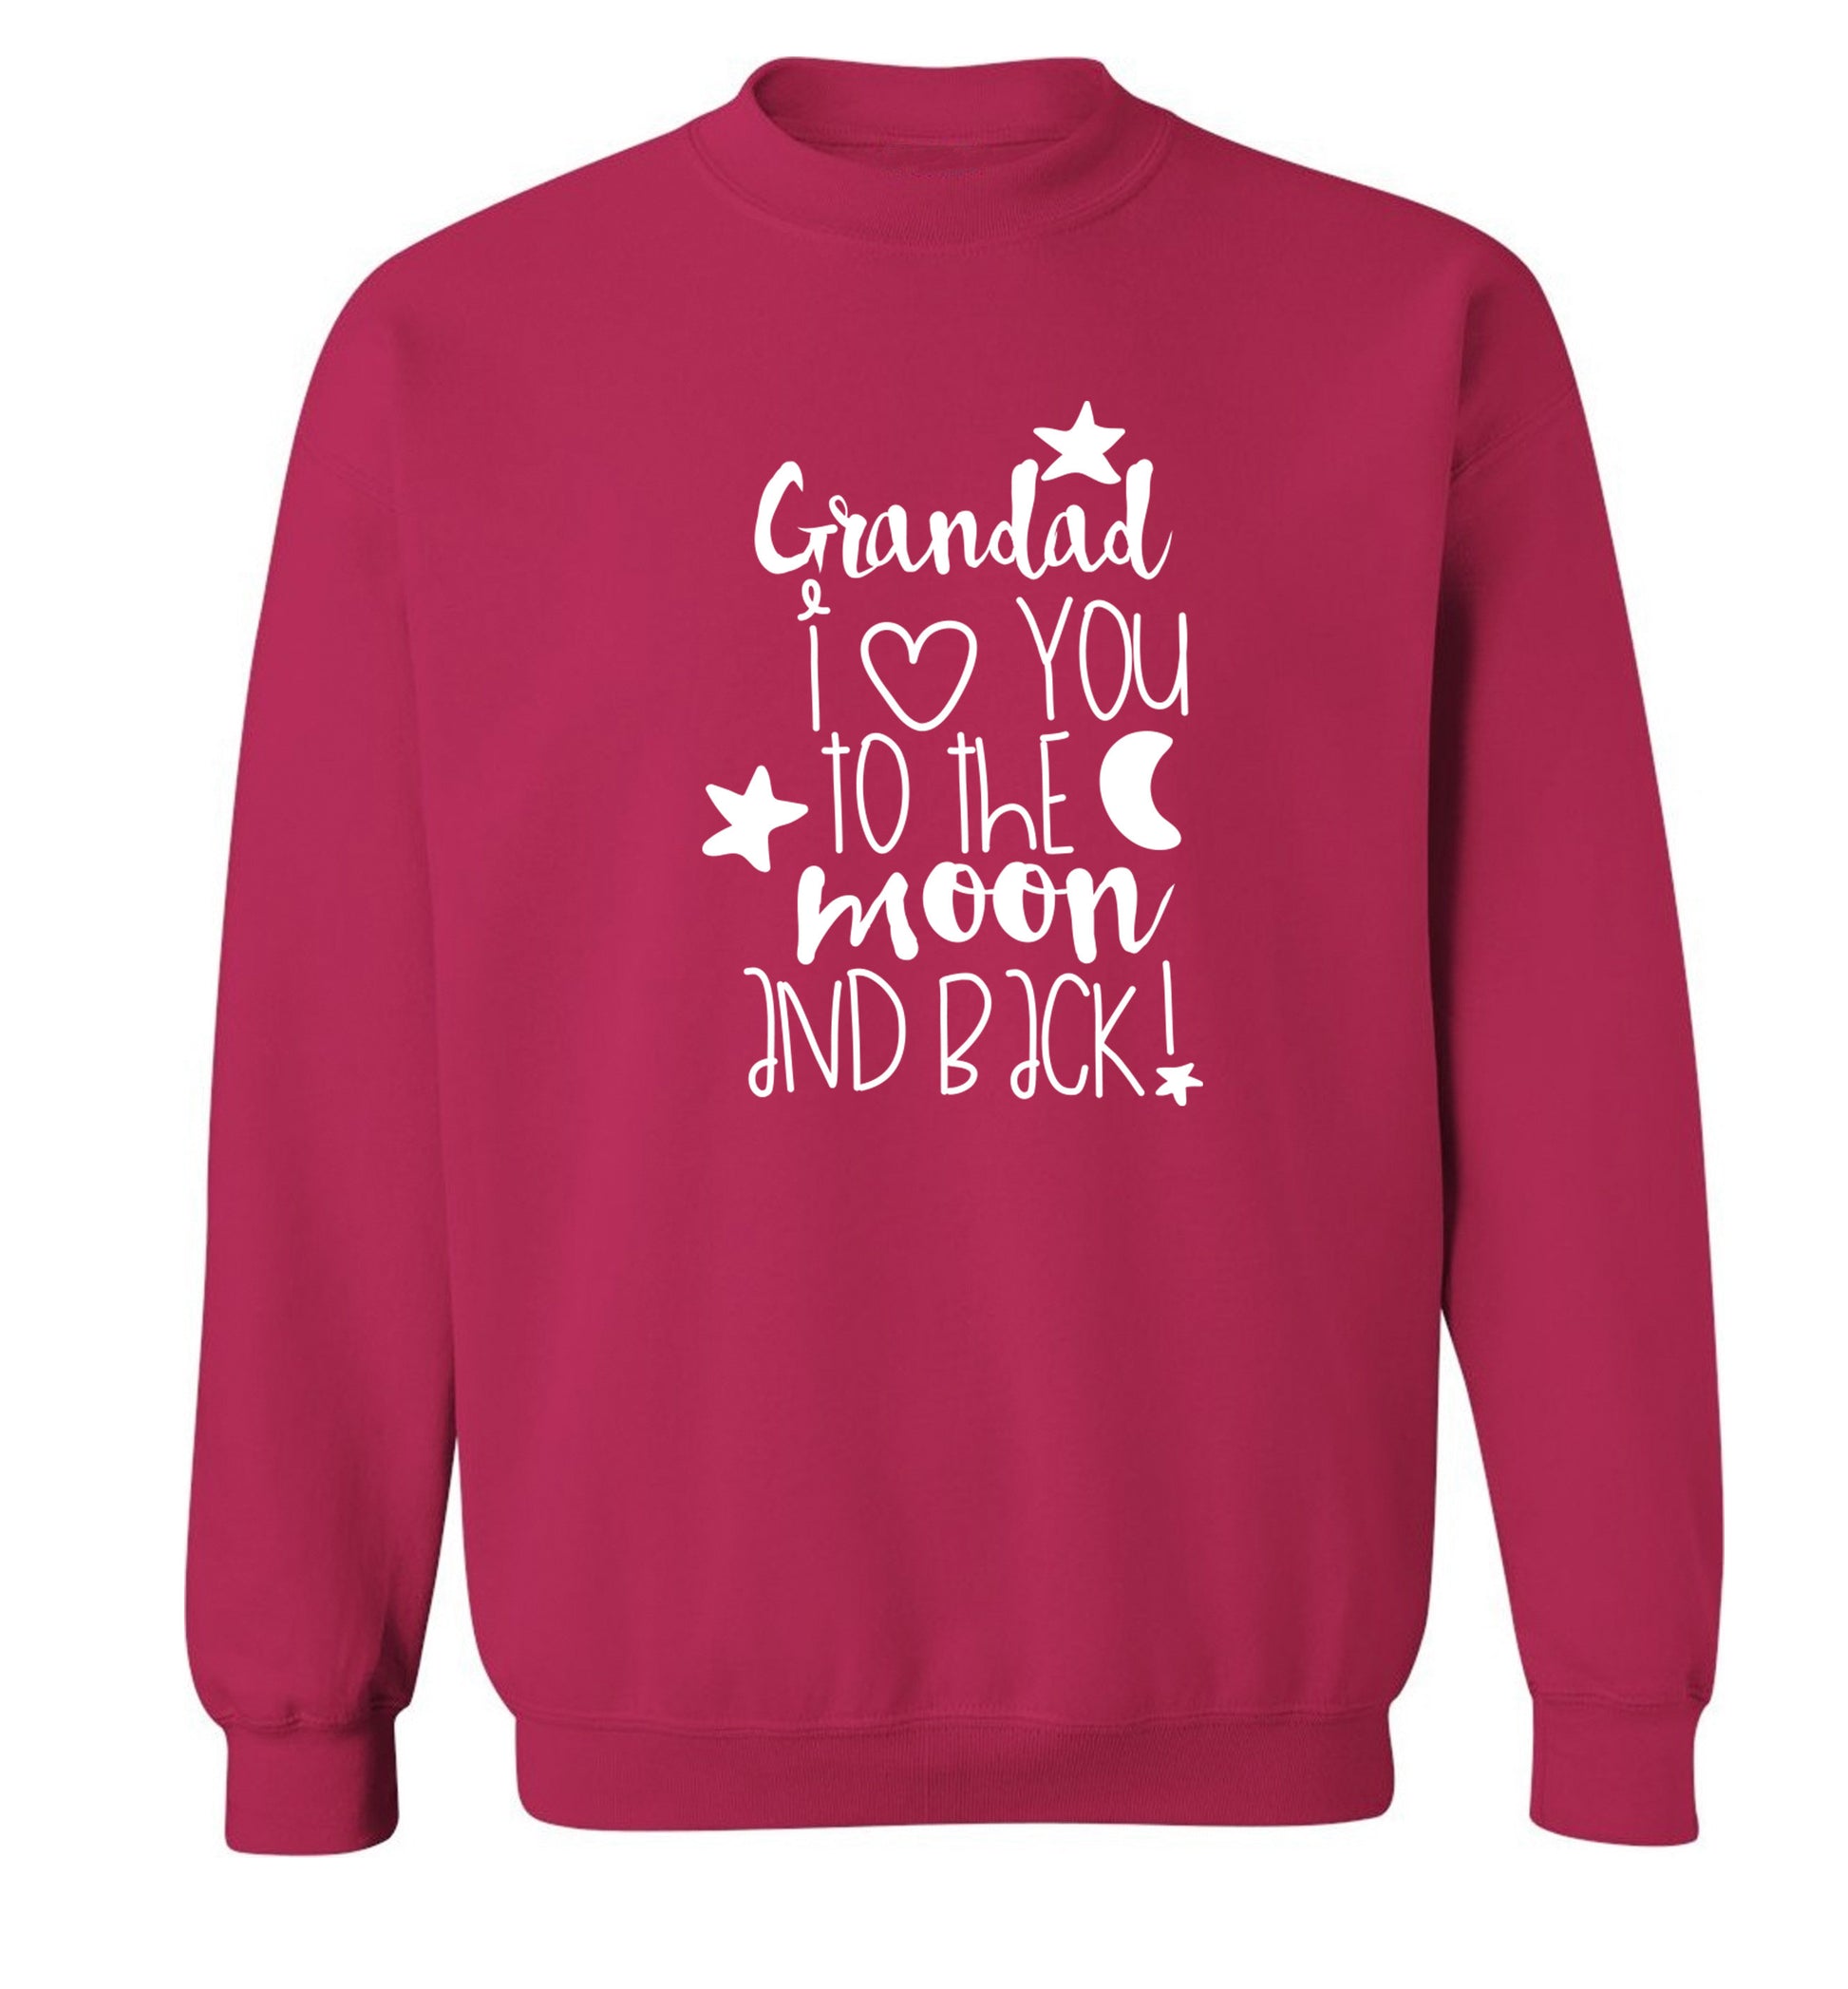 Grandad's I love you to the moon and back Adult's unisex pink  sweater XL